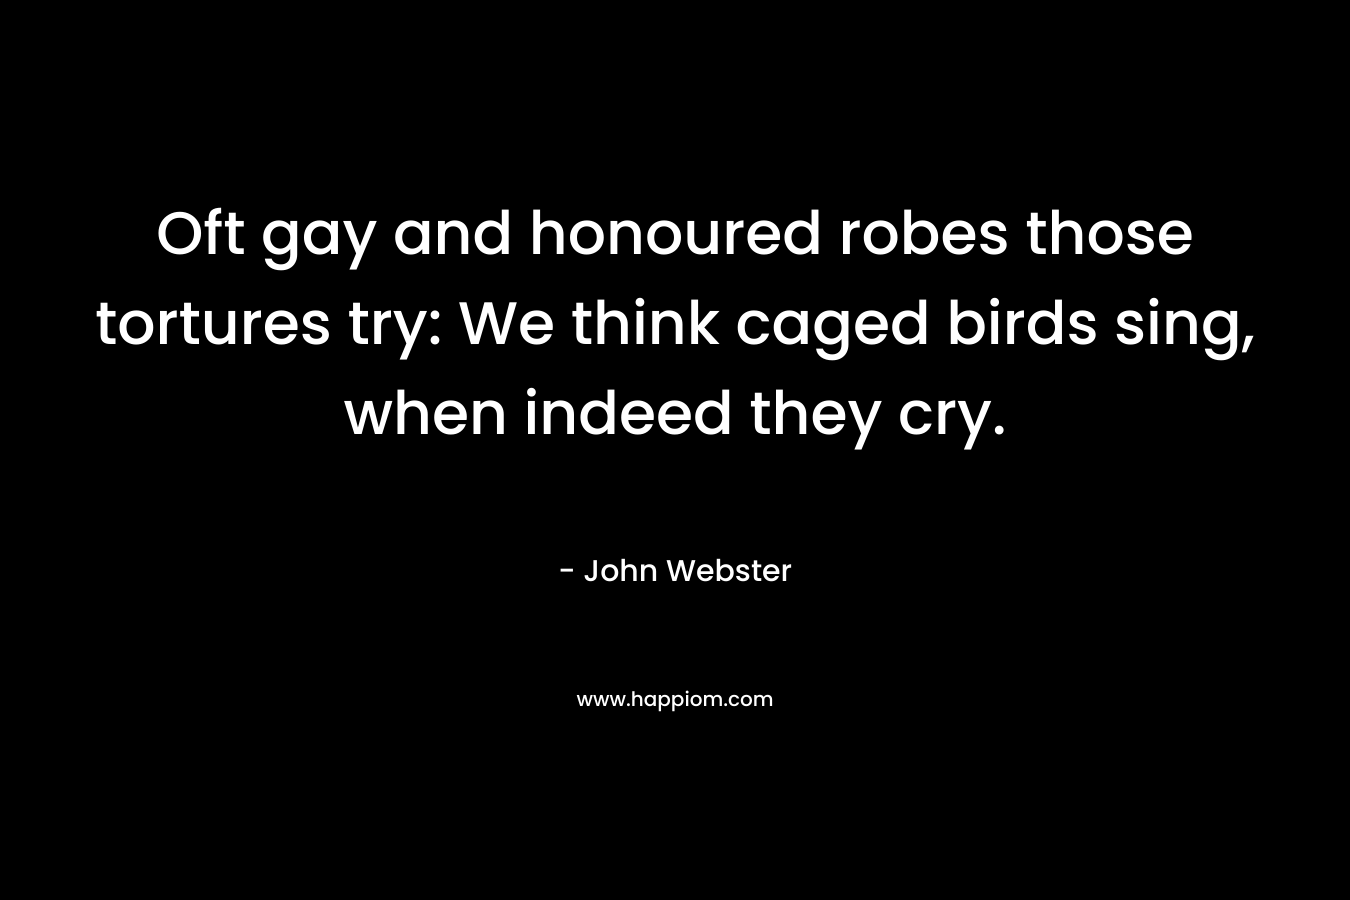 Oft gay and honoured robes those tortures try: We think caged birds sing, when indeed they cry. – John Webster